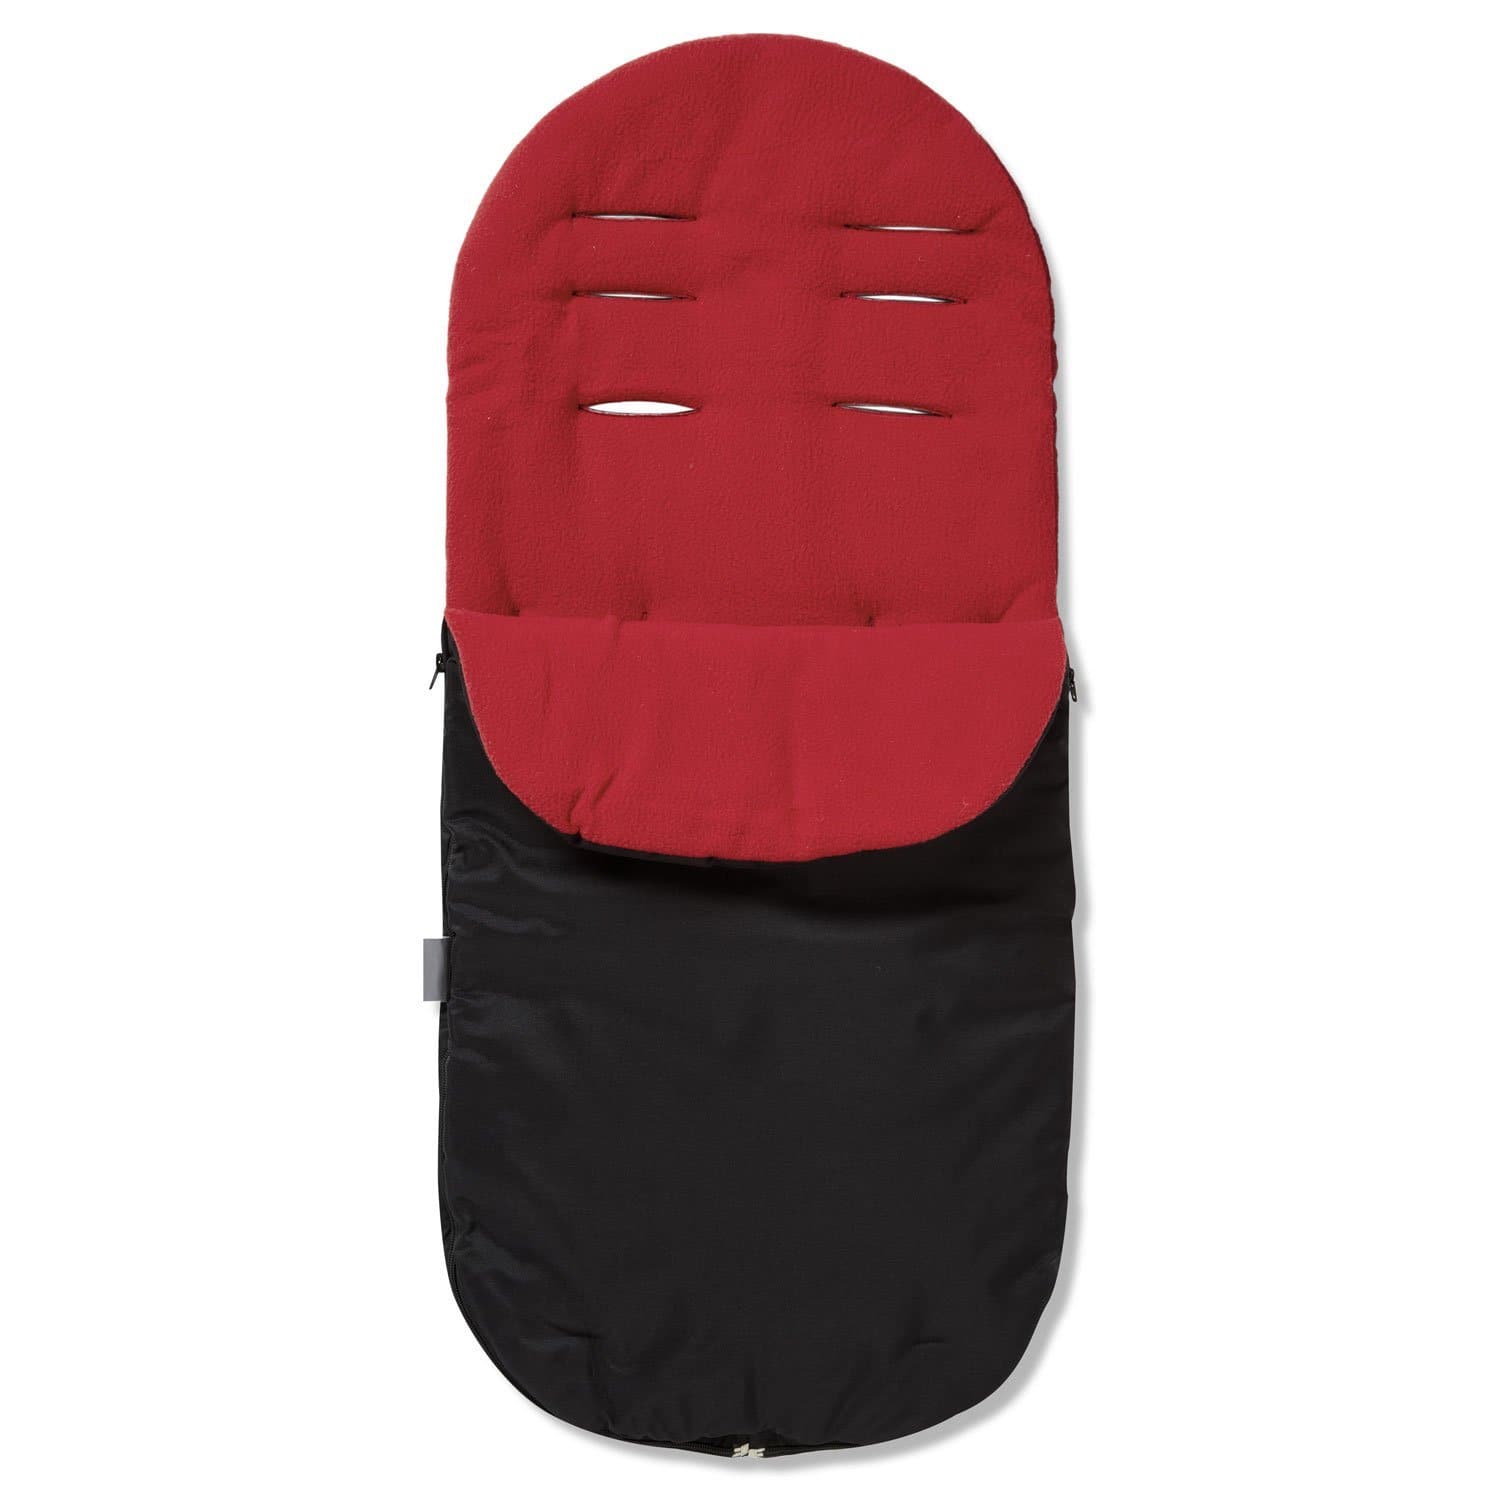 Footmuff / Cosy Toes Compatible with Venicci - Red / Fits All Models | For Your Little One